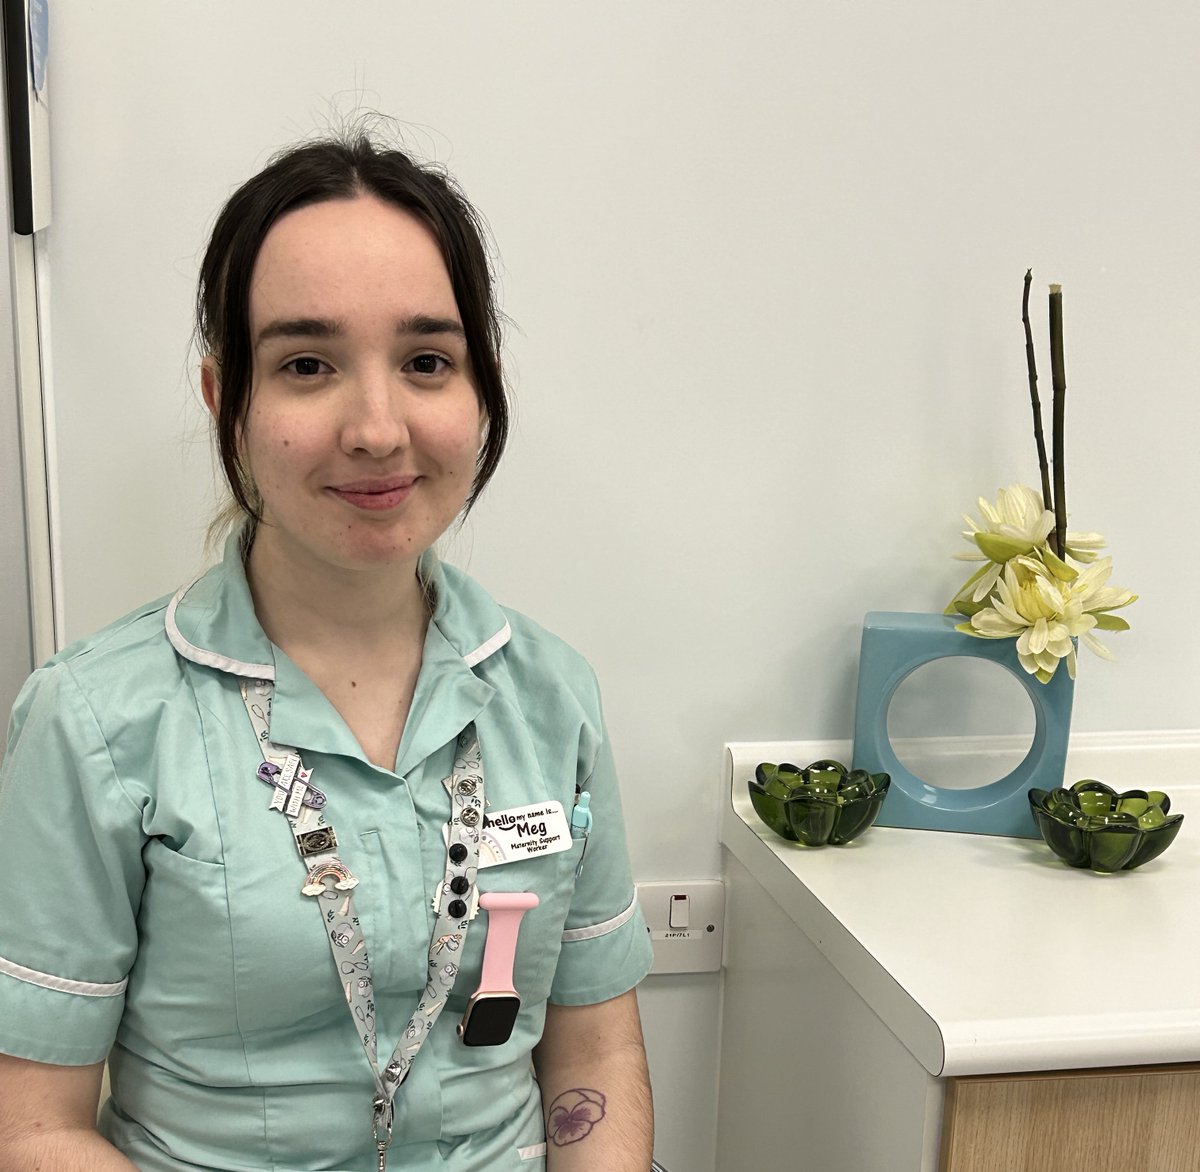 Meet Meg, a senior maternity support worker. “I love the support we offer to women who allow us to be a part of their pregnancy journey. I look forward to starting my midwifery training in the next few years.” #WeAreHCSWs